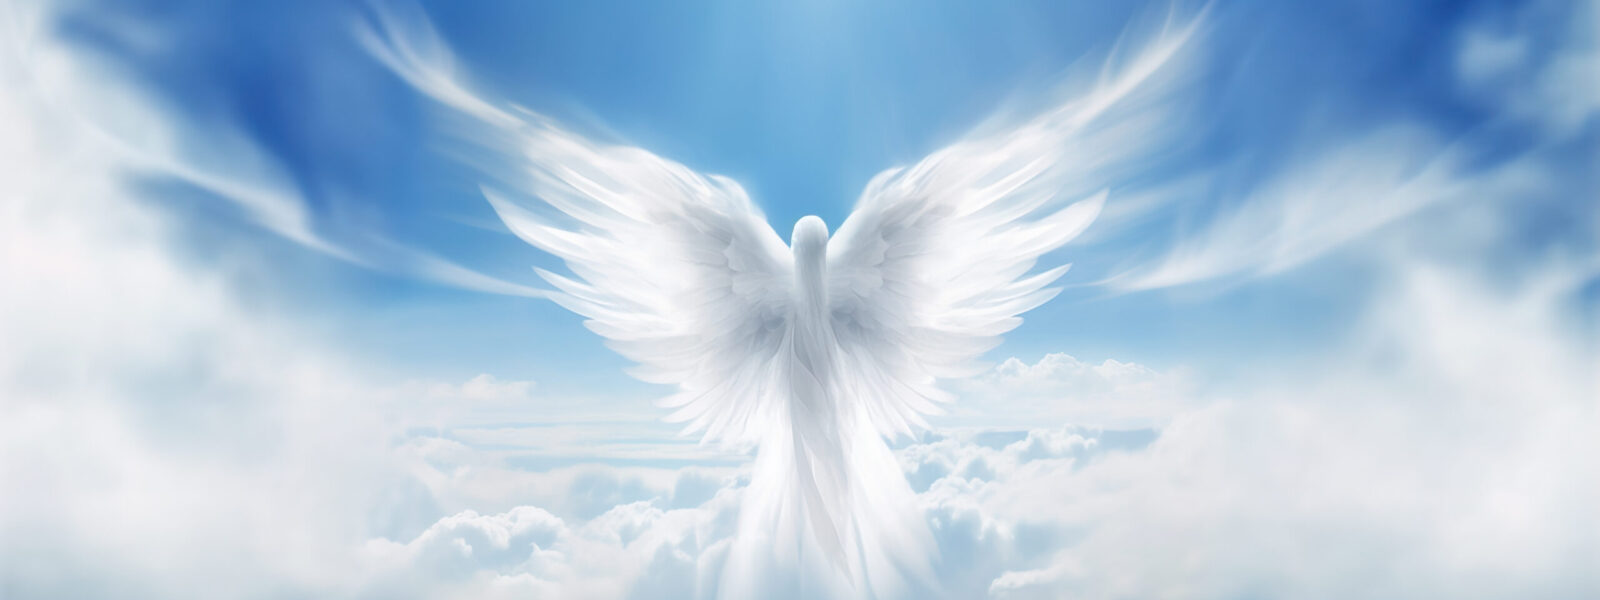 "Angel spirit soaring in a serene blue sky dotted with fluffy clouds, symbolizing the spiritual journey and deeper connection with God encouraged by Speak Connected."